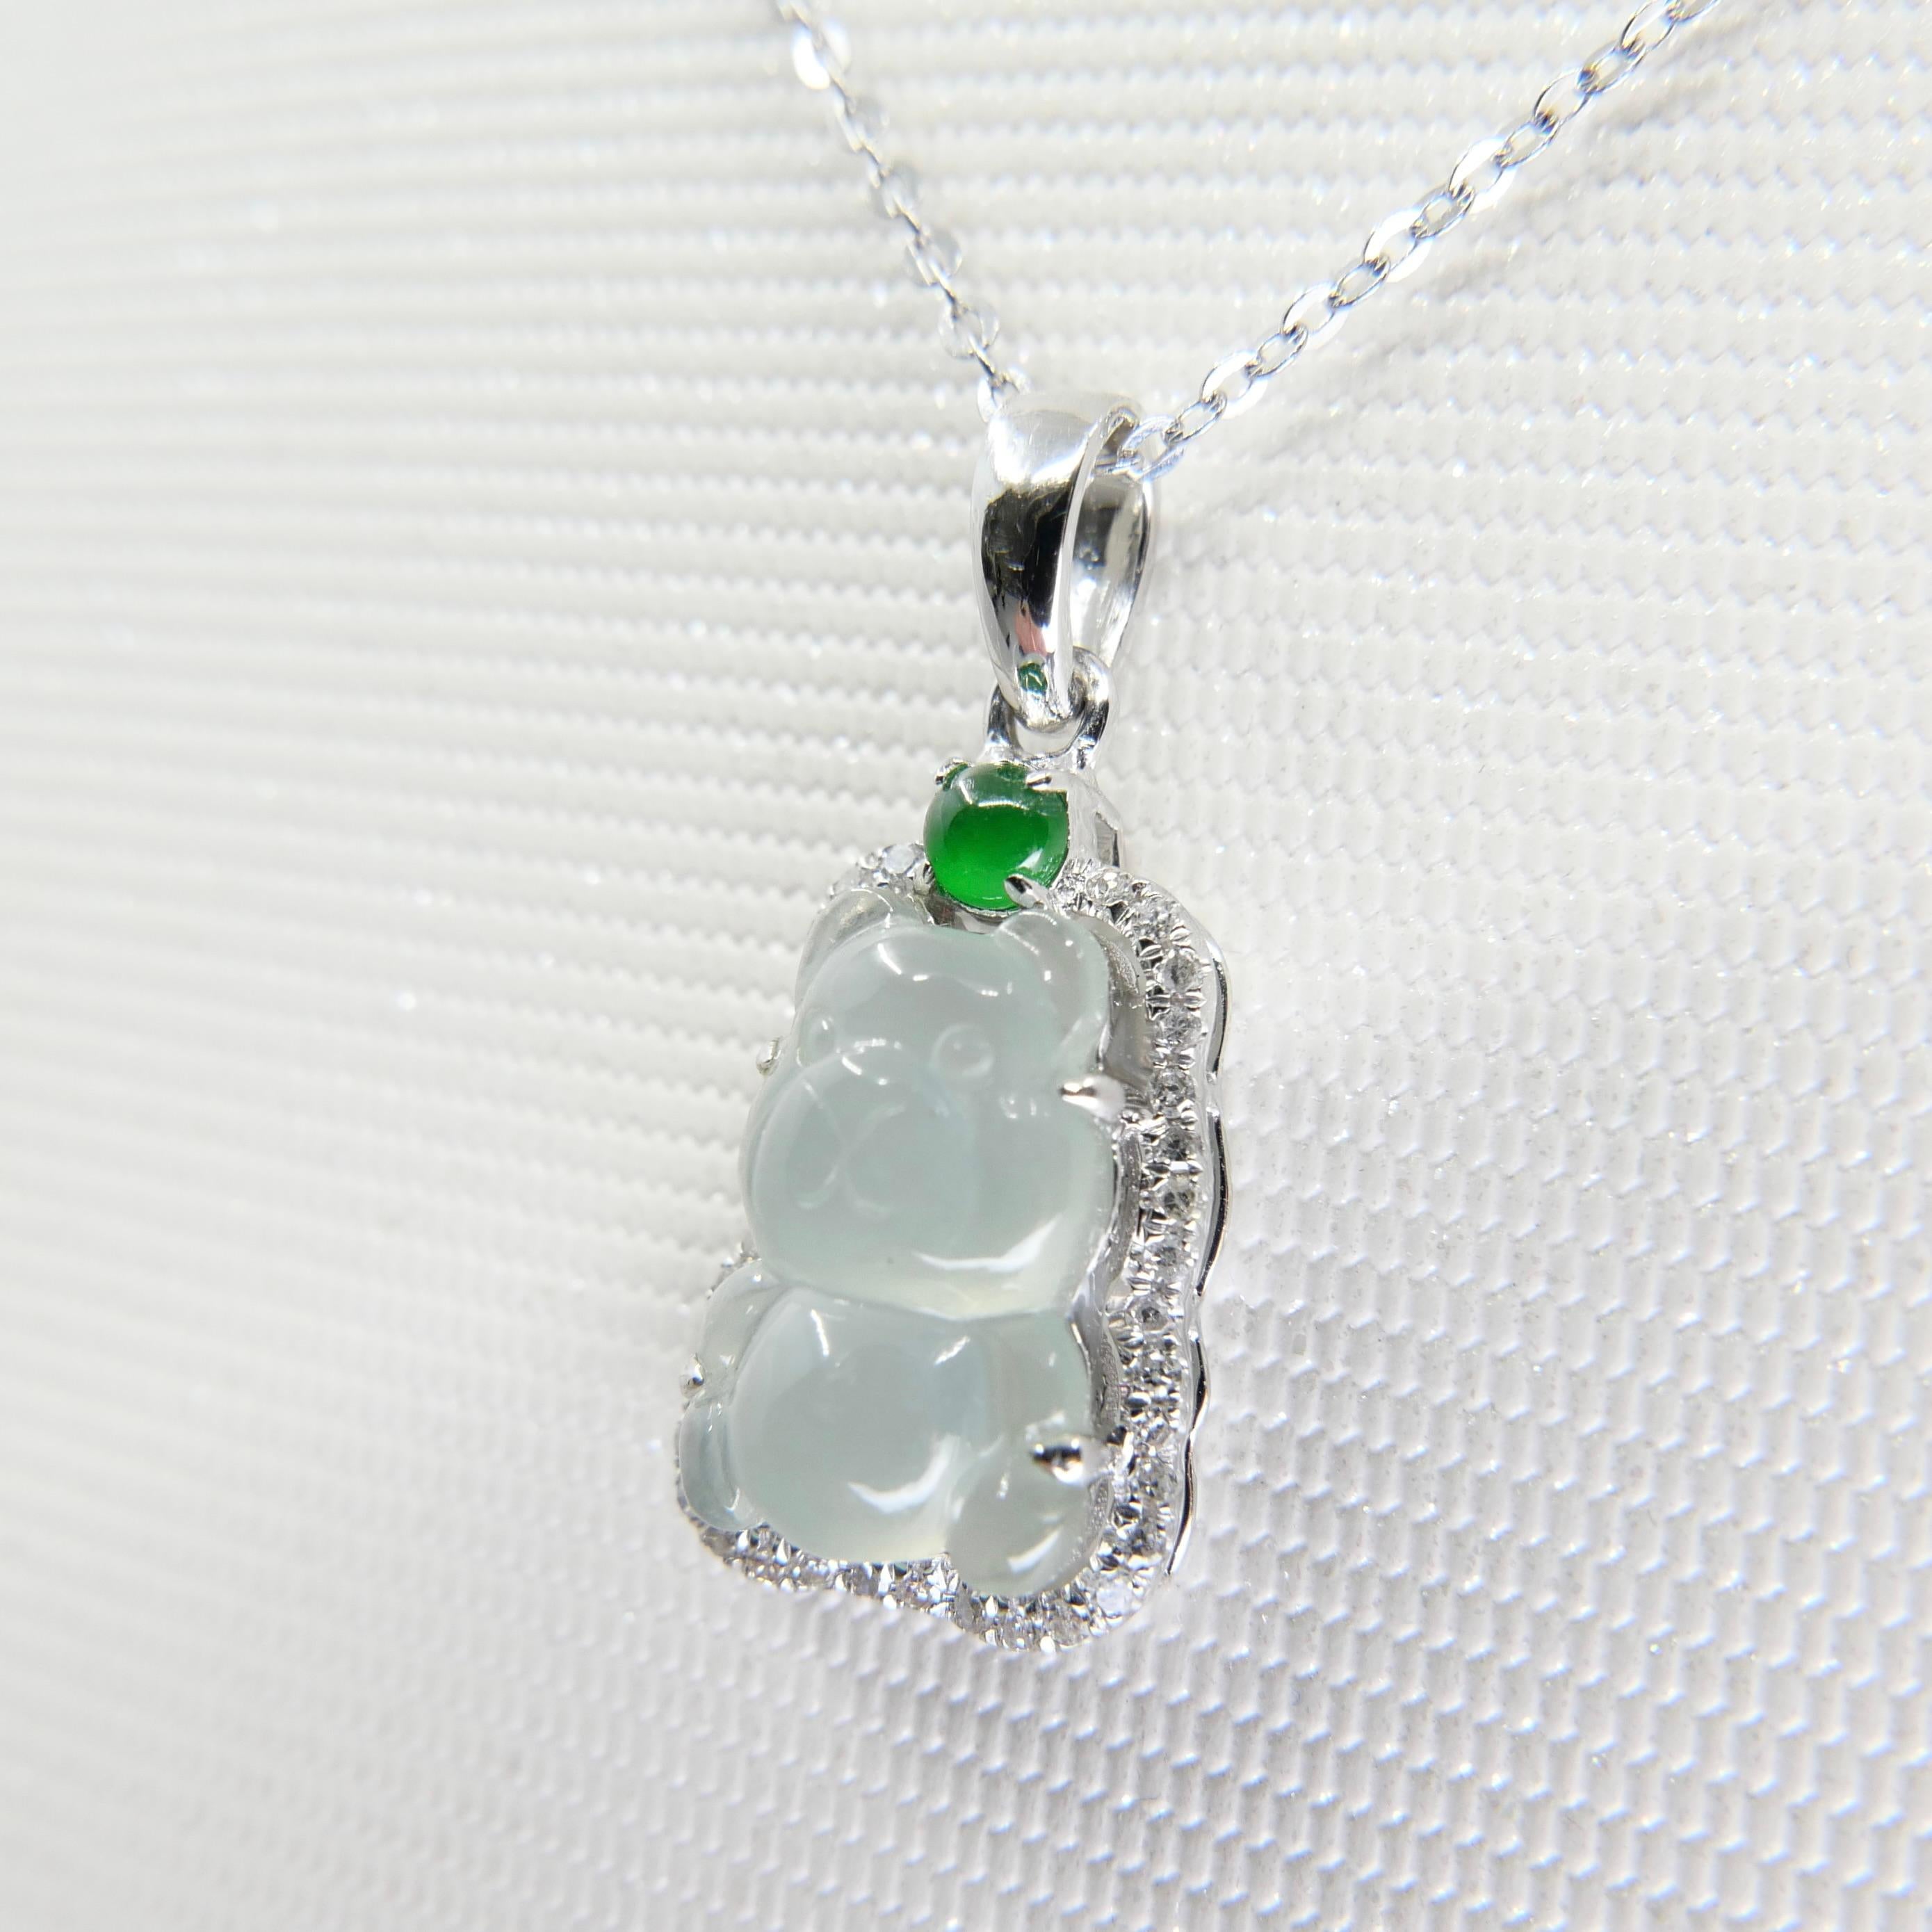 Rough Cut Certified Imperial & Icy Jade Diamond Gummy Bear Pendant, Cuteness Overload For Sale